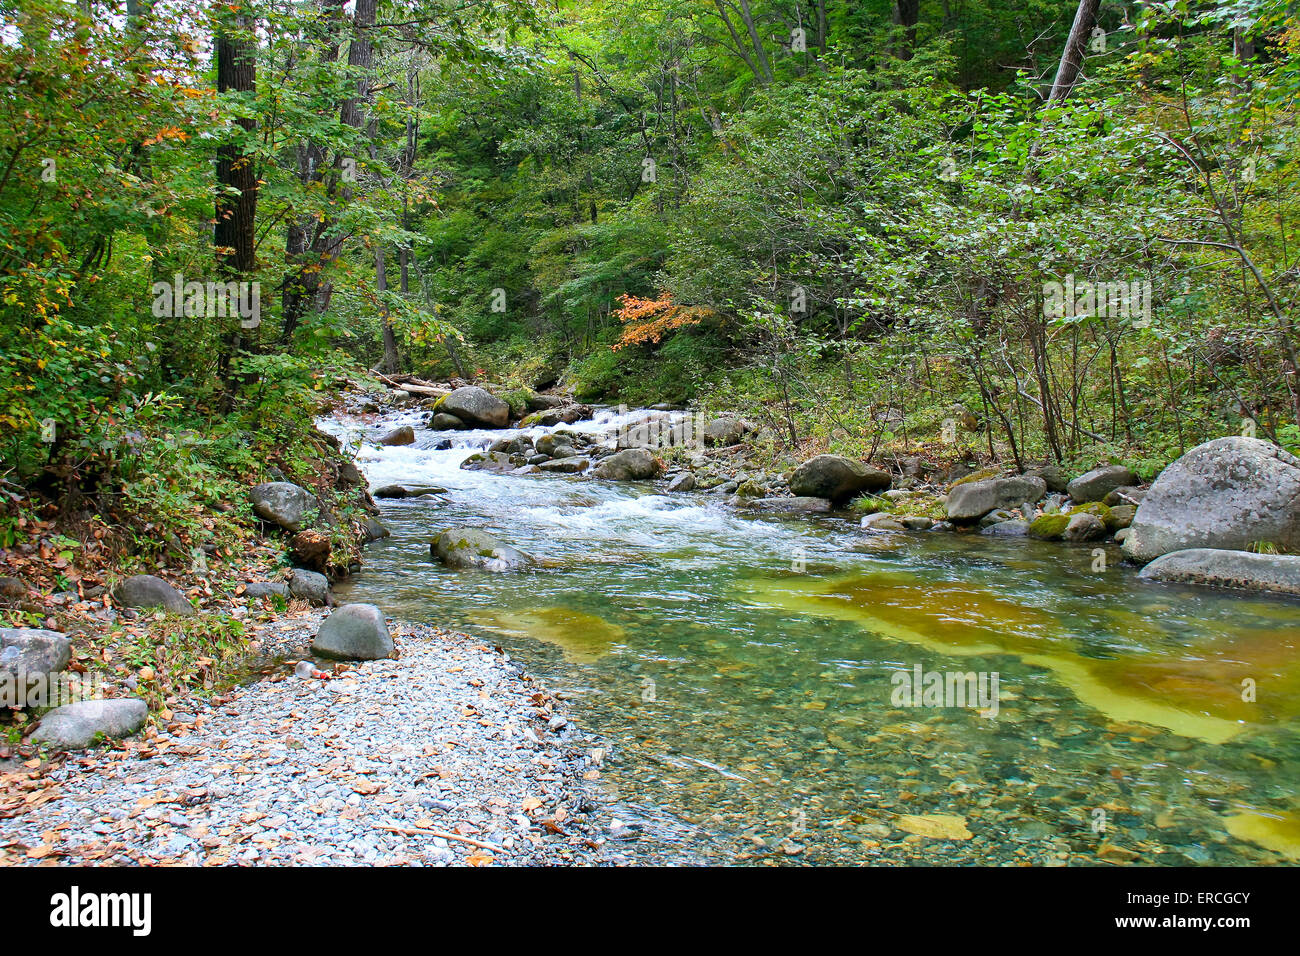 Forest landscape - dense forest and cold mountain stream. Stock Photo